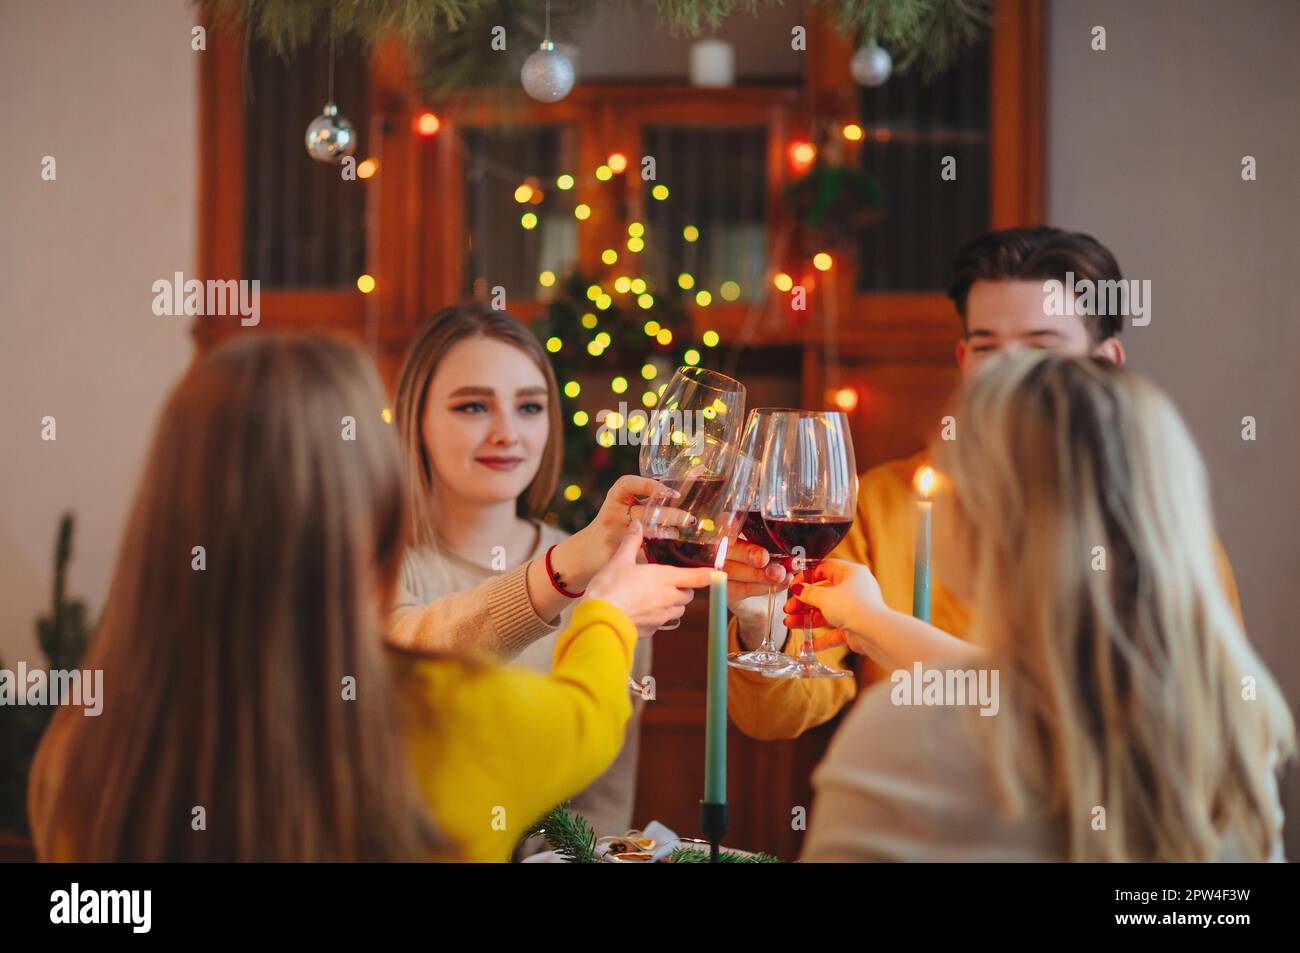 Happy young friends clinking glasses of wine over table decorated for Christmas celebration at home Stock Photo